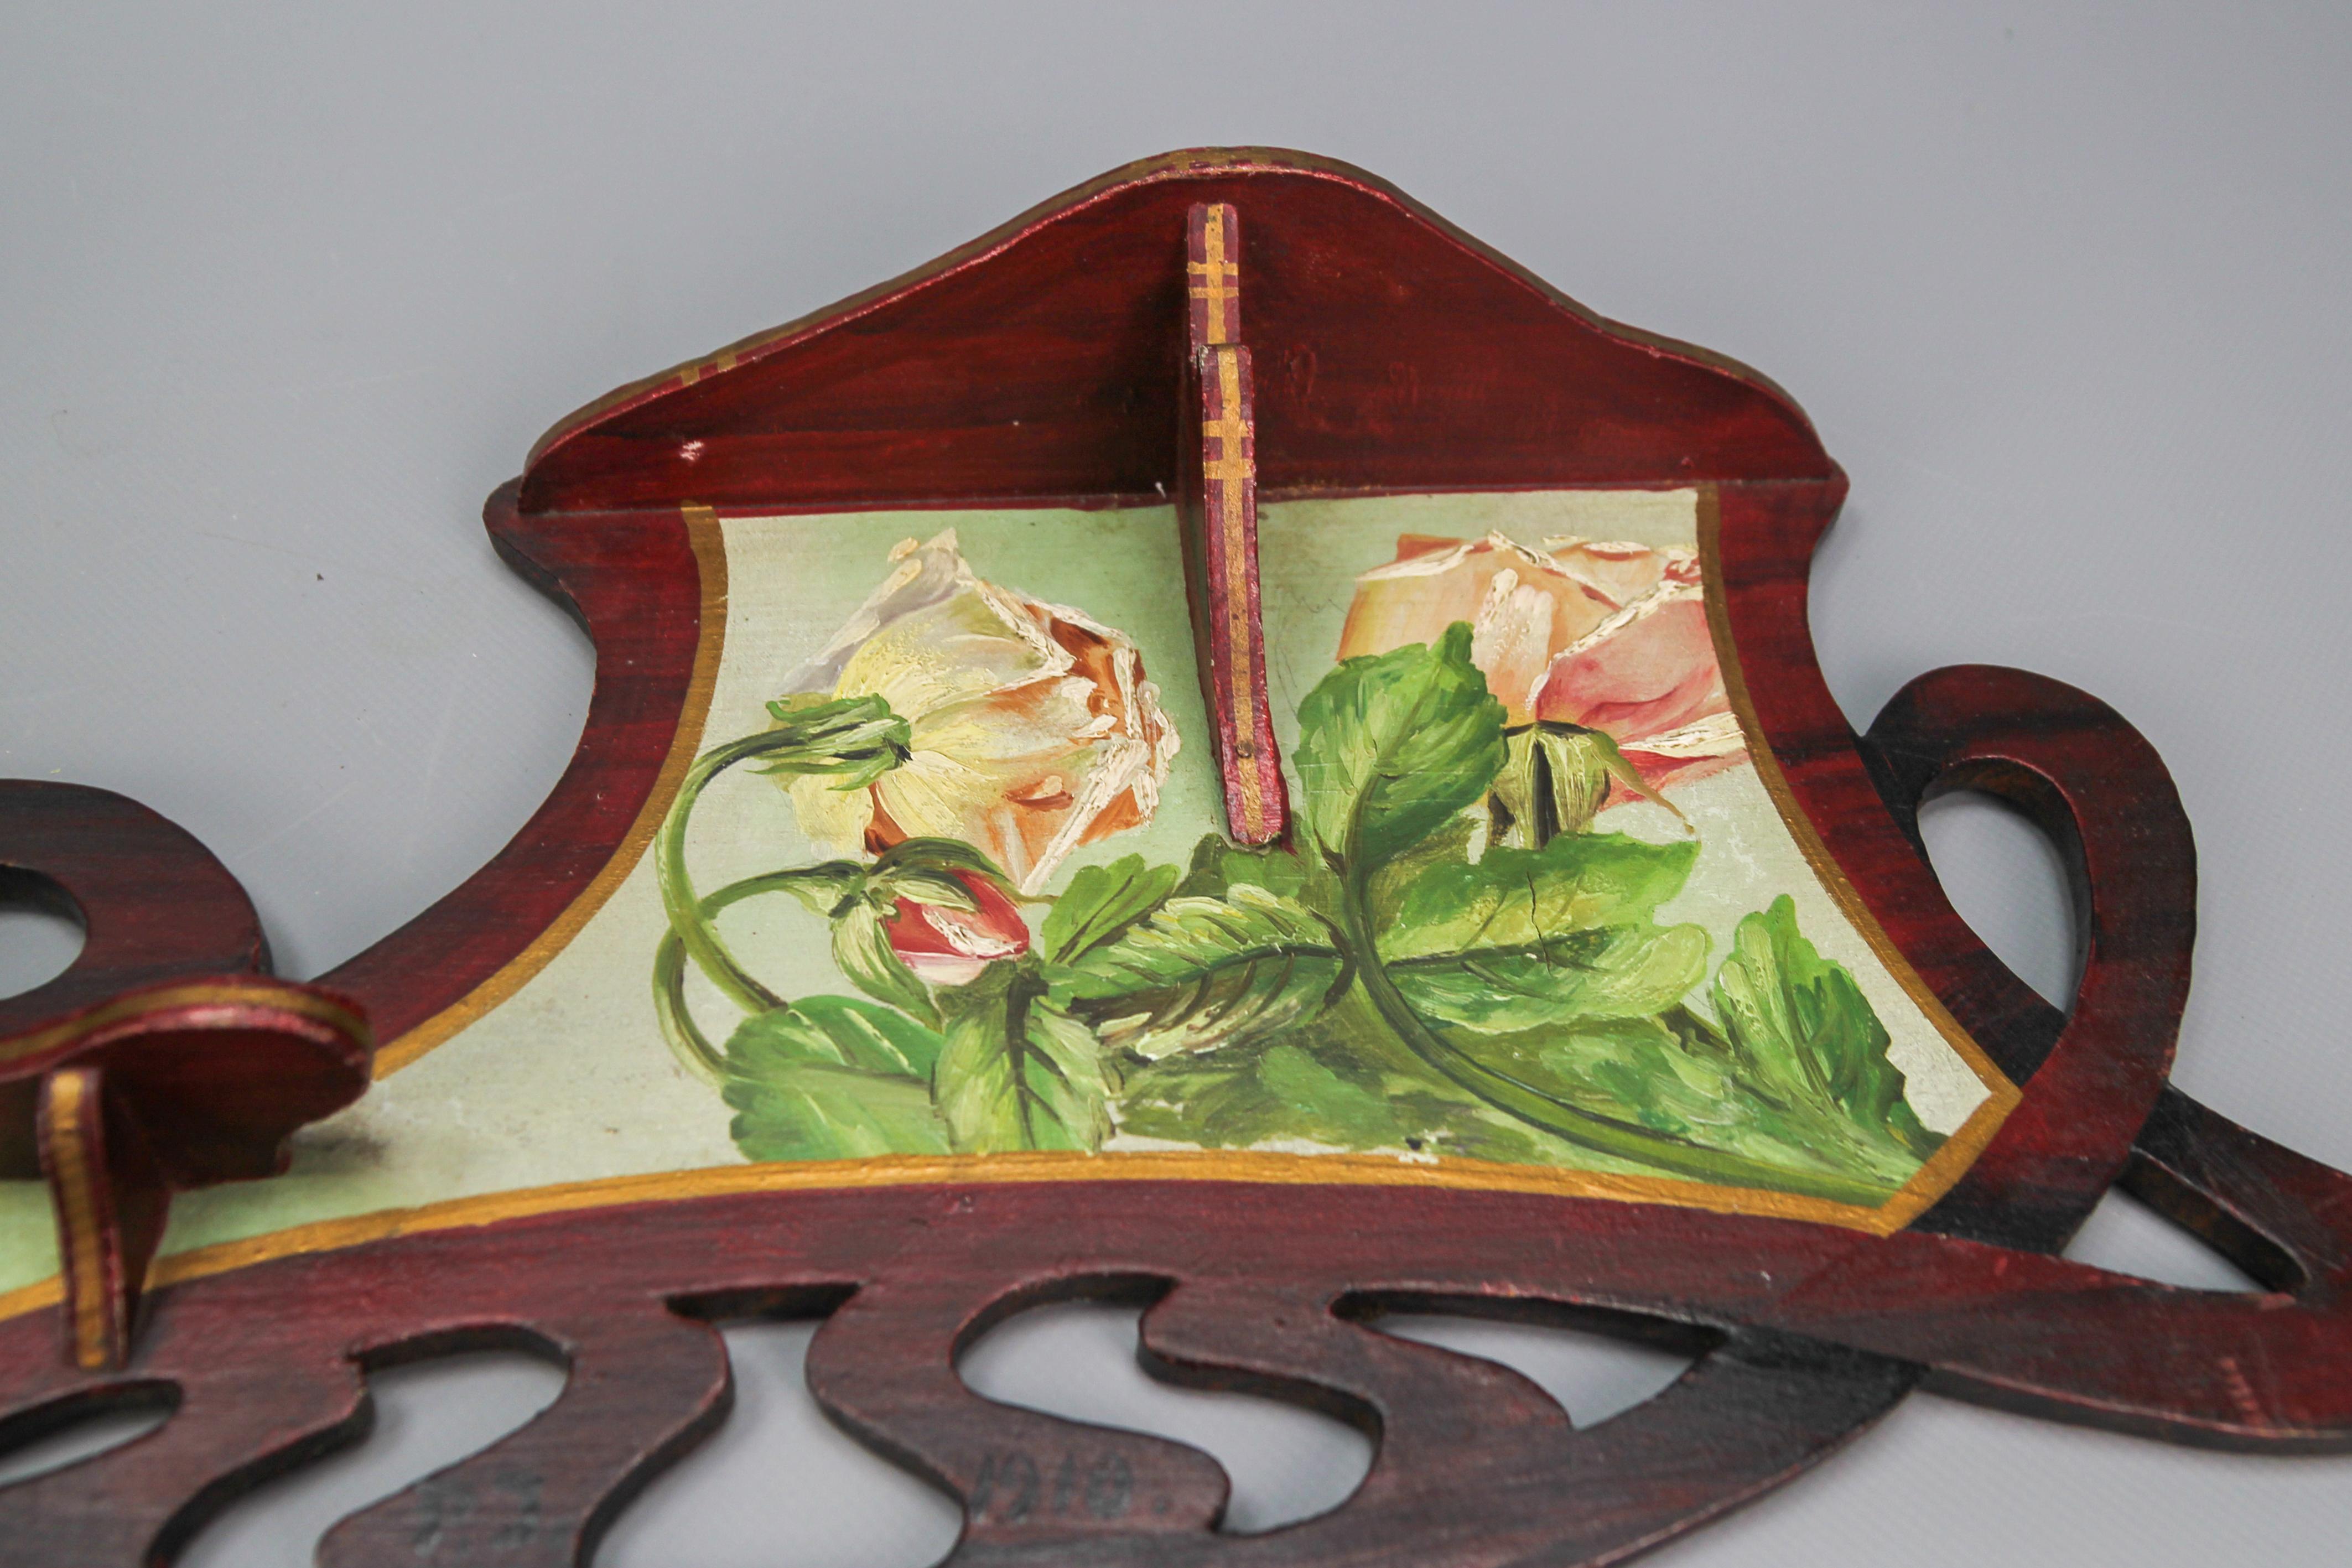 Pair of Art Nouveau Wooden Hand-Painted Floral Shelves, Germany, 1910 For Sale 8